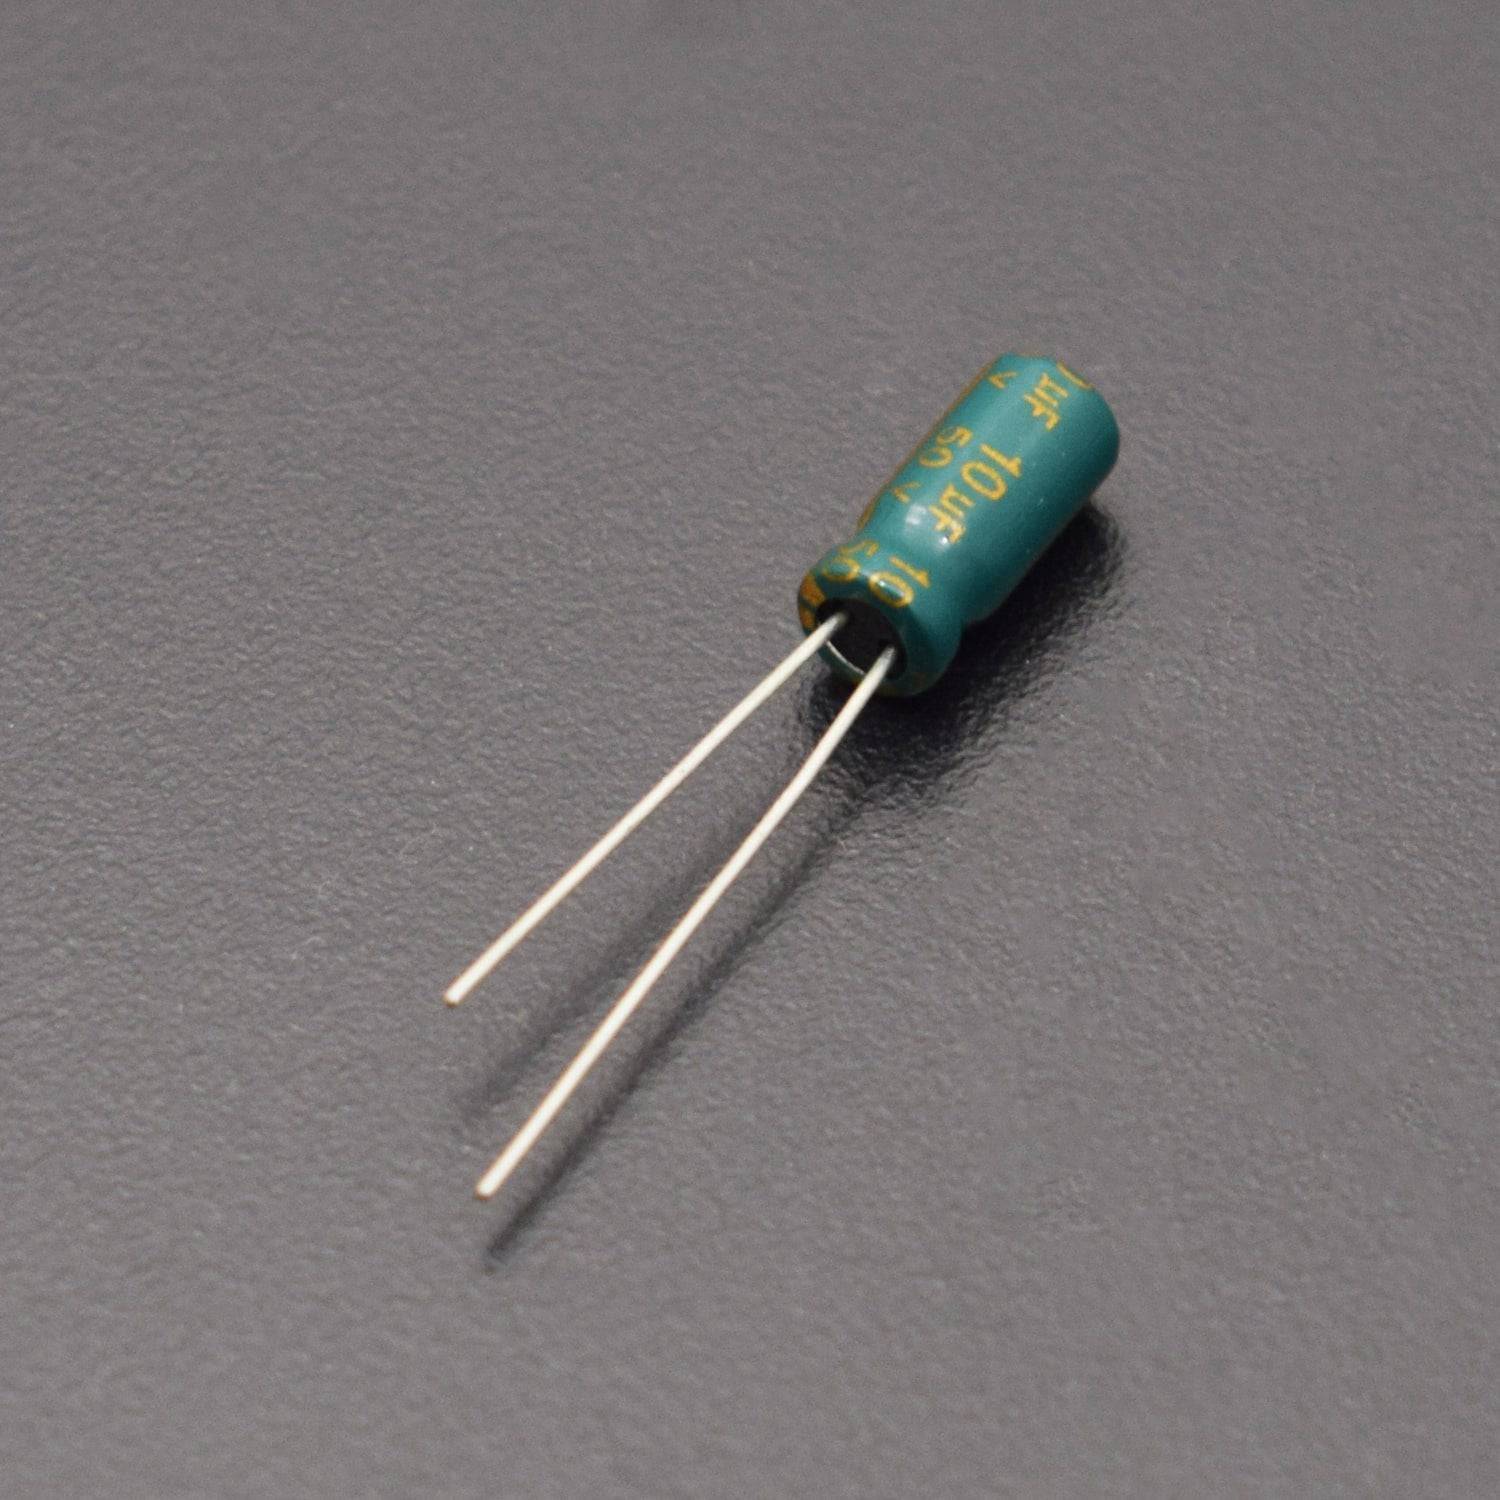 10Uf 50V 105C Radial Electrolytic Capacitor, 5 x 11 mm - RS1128 - REES52